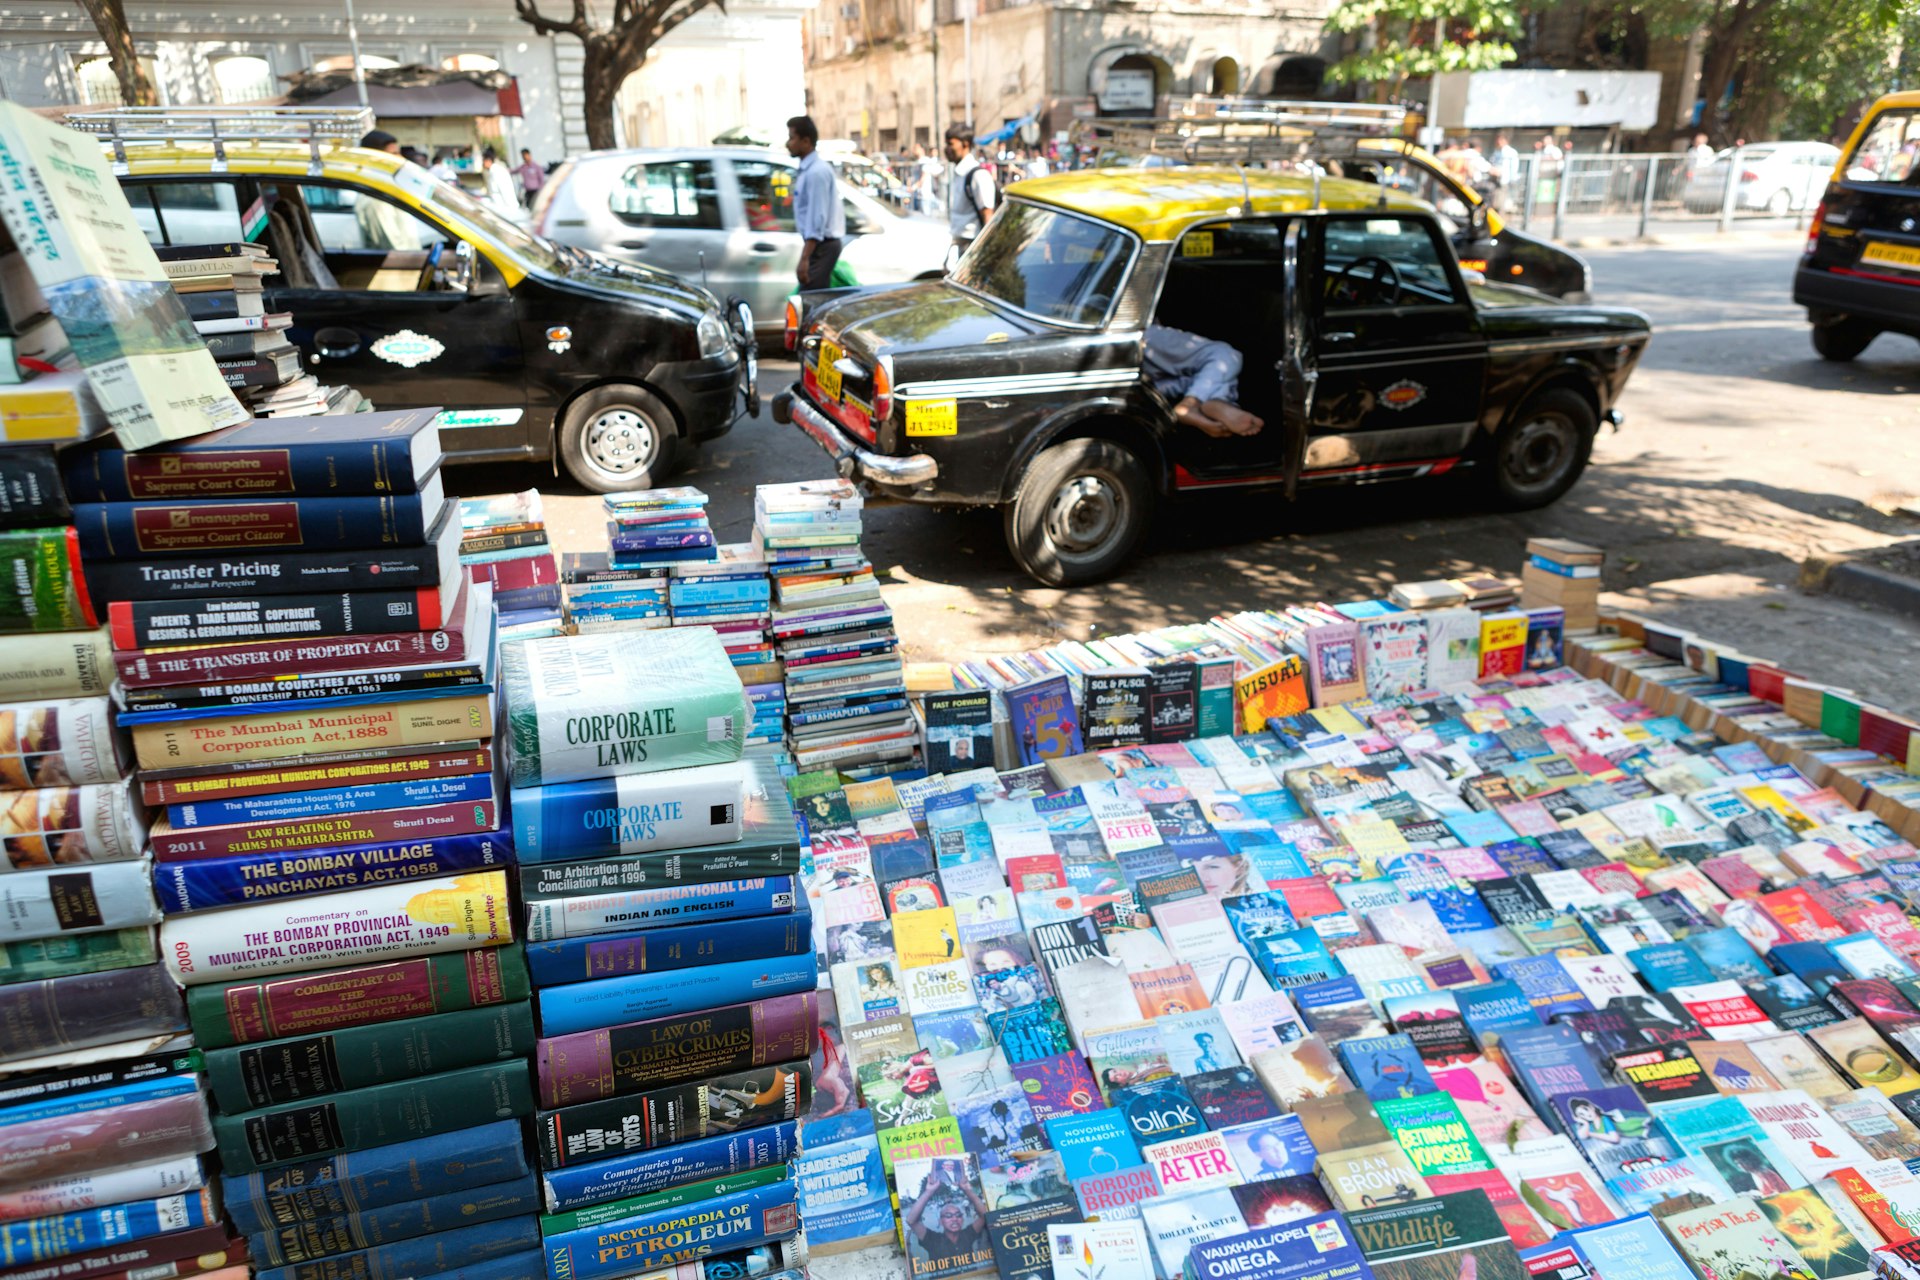 Books for sale by the roadside in Fort